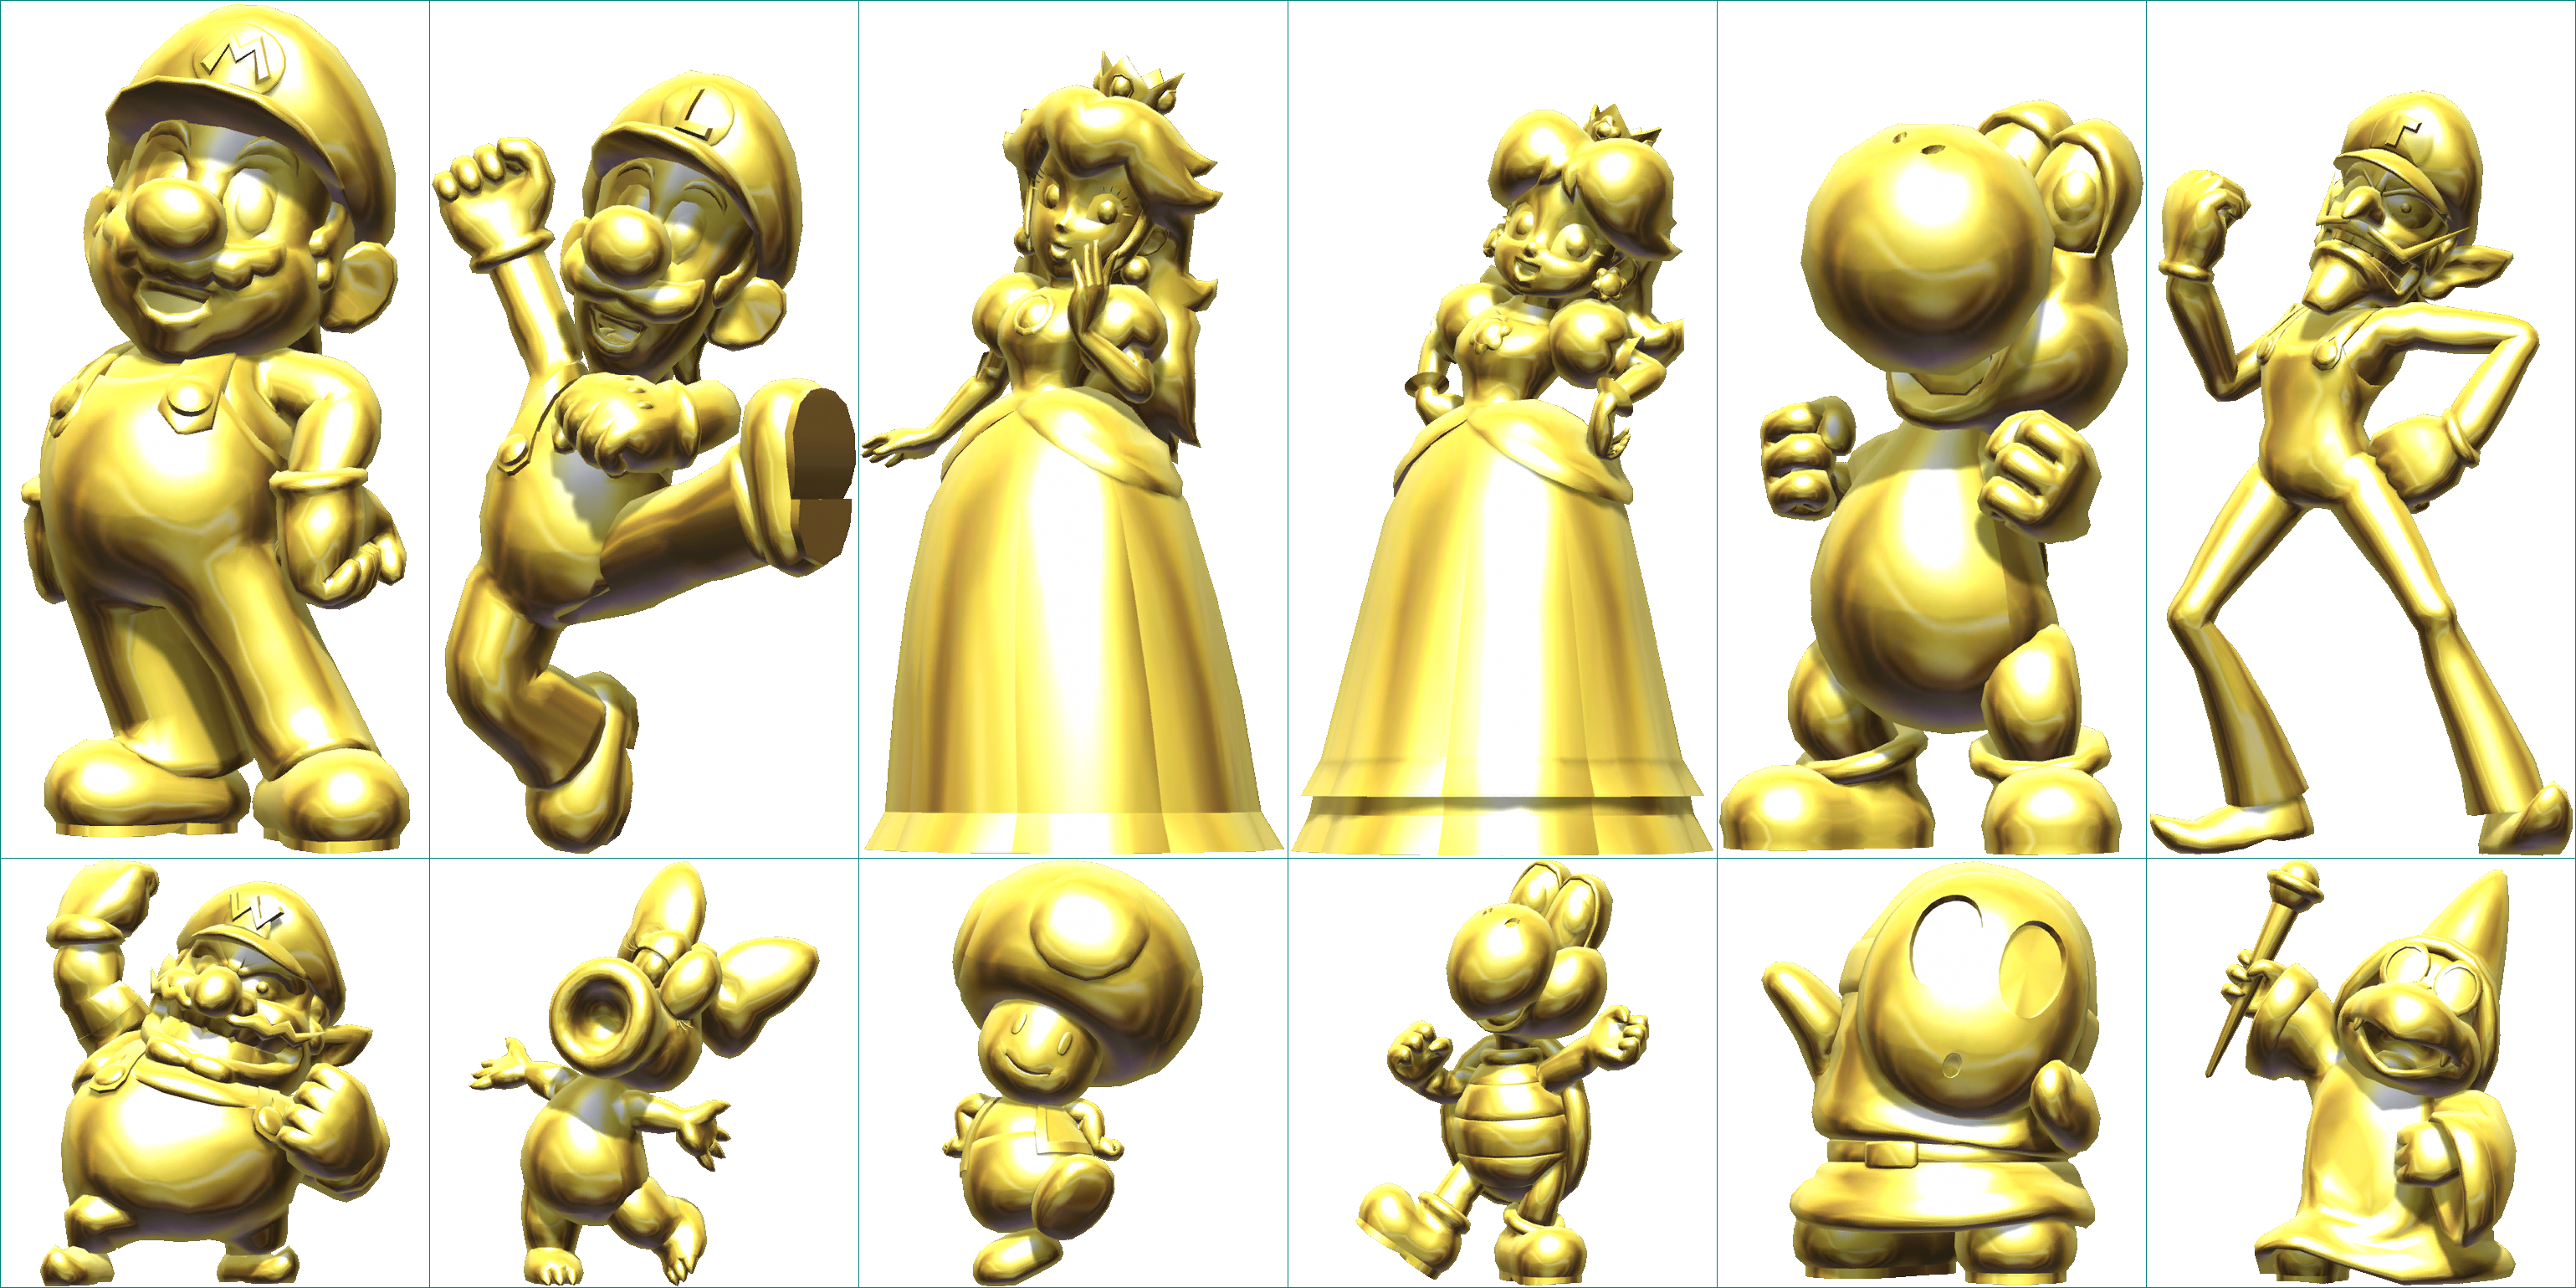 Mario Party 9 - Step It Up Statues